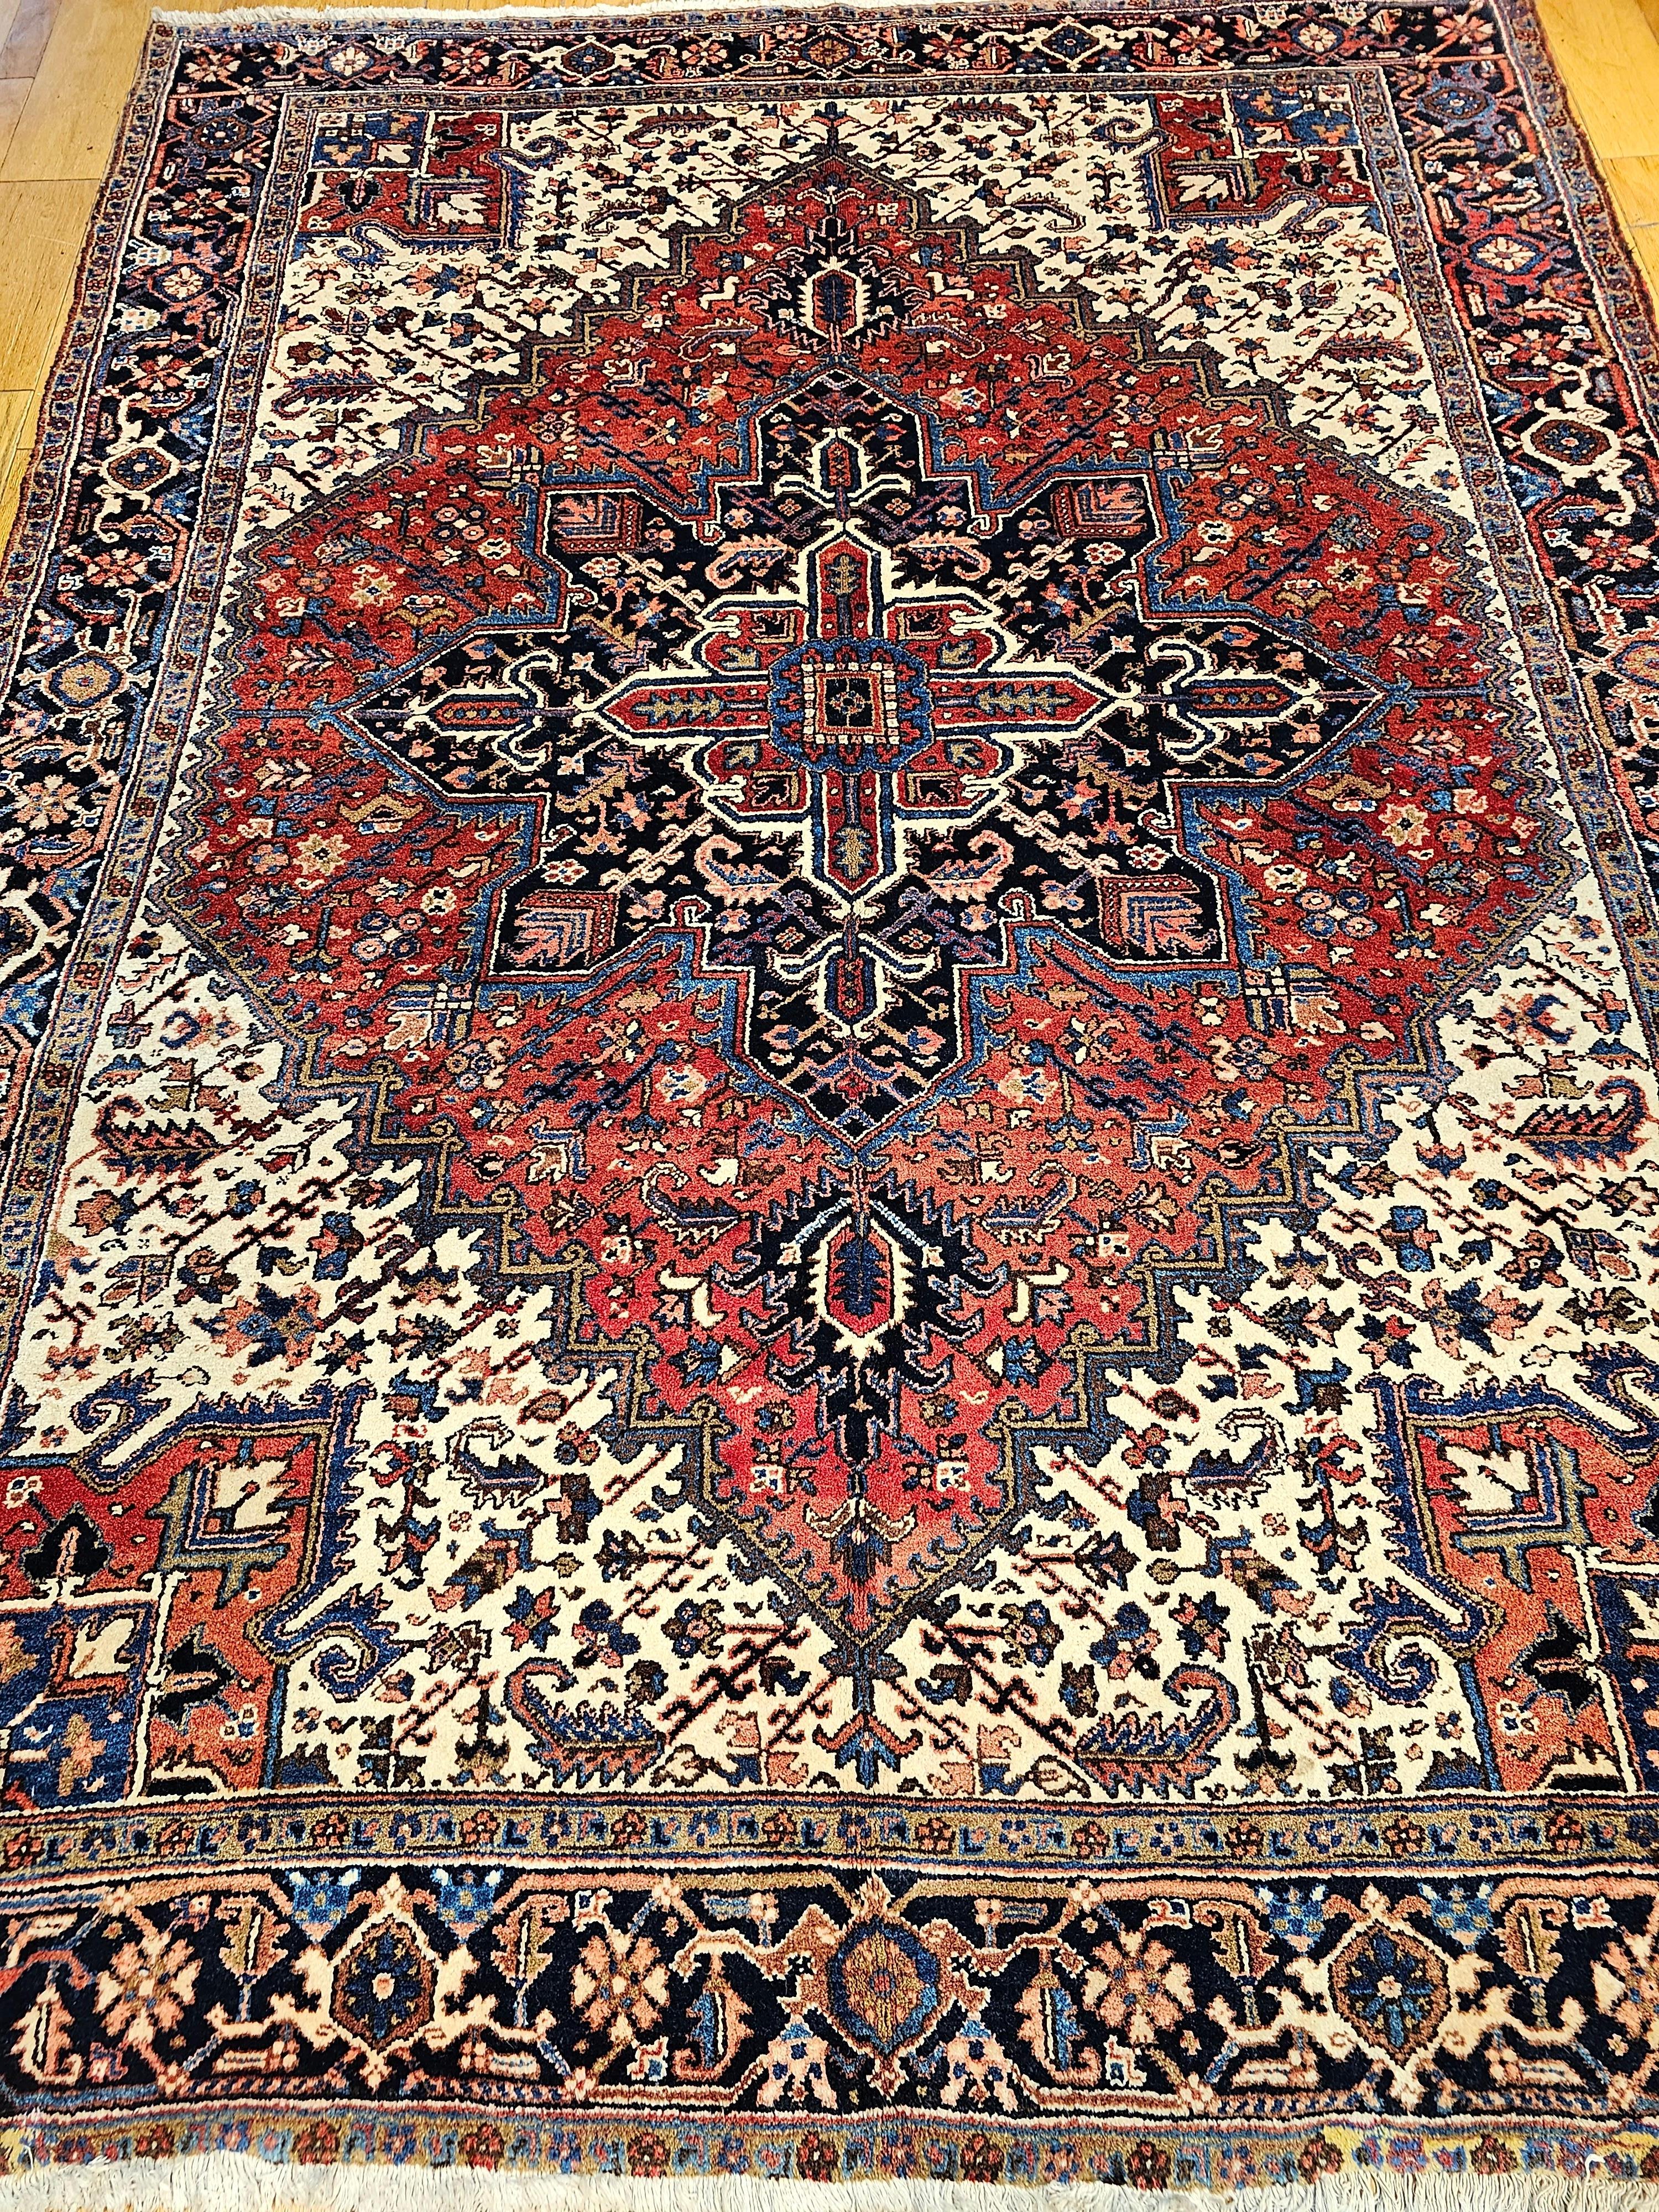 Vintage Persian Heriz room size rug from the 2nd quarter of the 20th century. The large central medallion in this Heriz rug is in a  blue color and is set in a brick red background color framed with ivory, red, and French blue colors spandrels. The